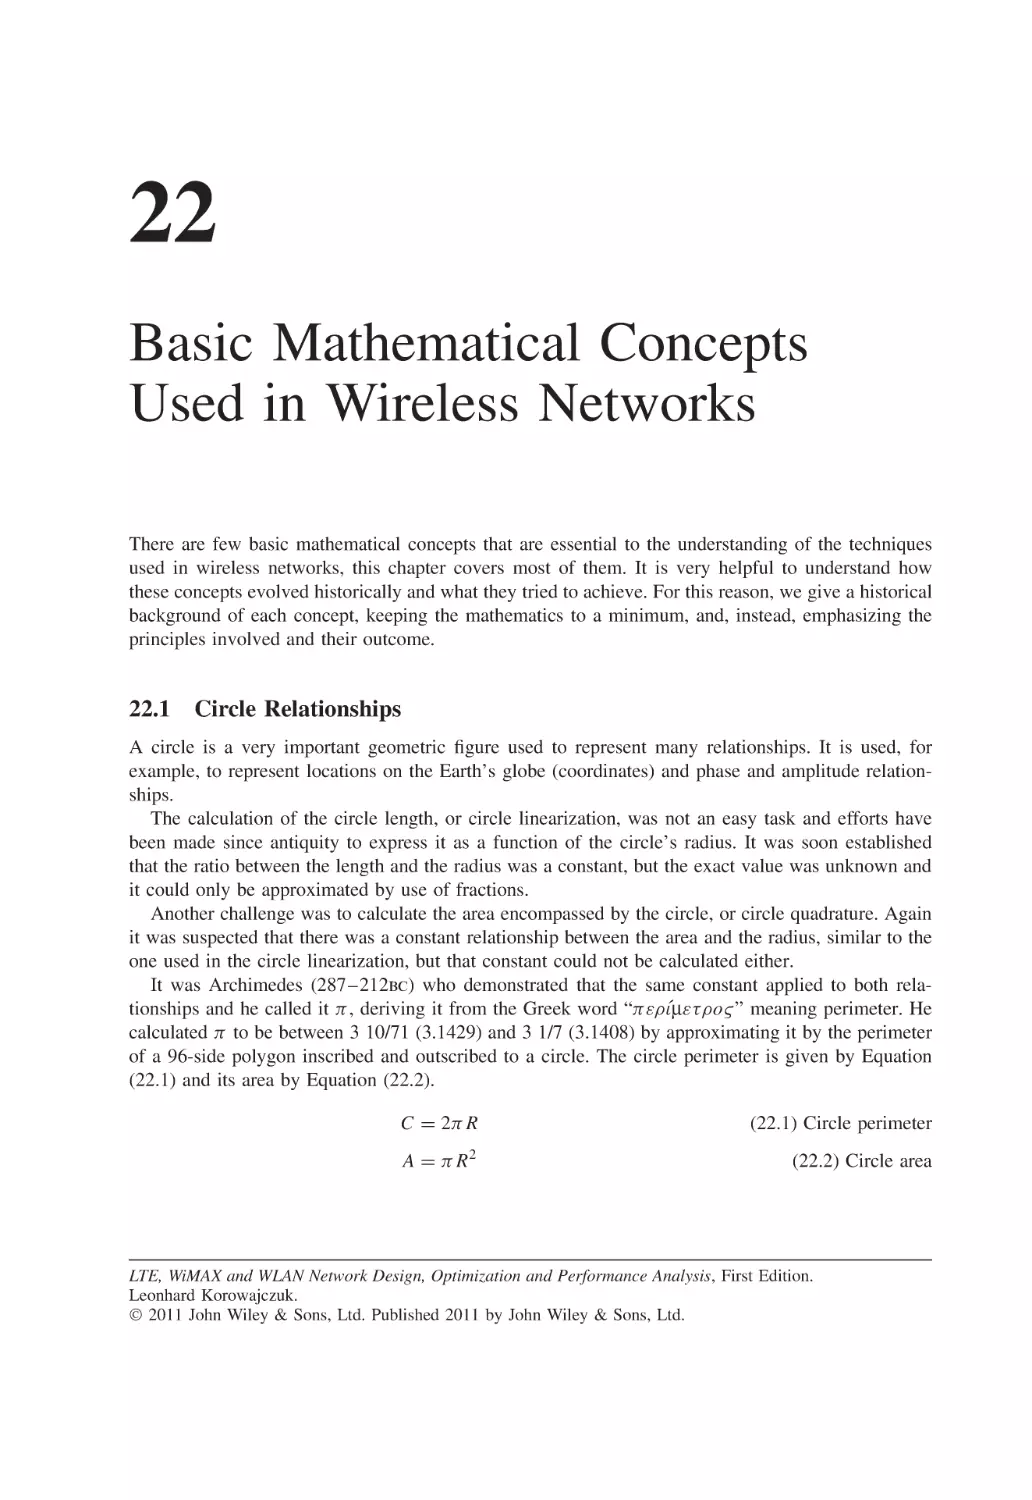 22 Basic Mathematical Concepts Used in Wireless Networks
22.1 Circle Relationships